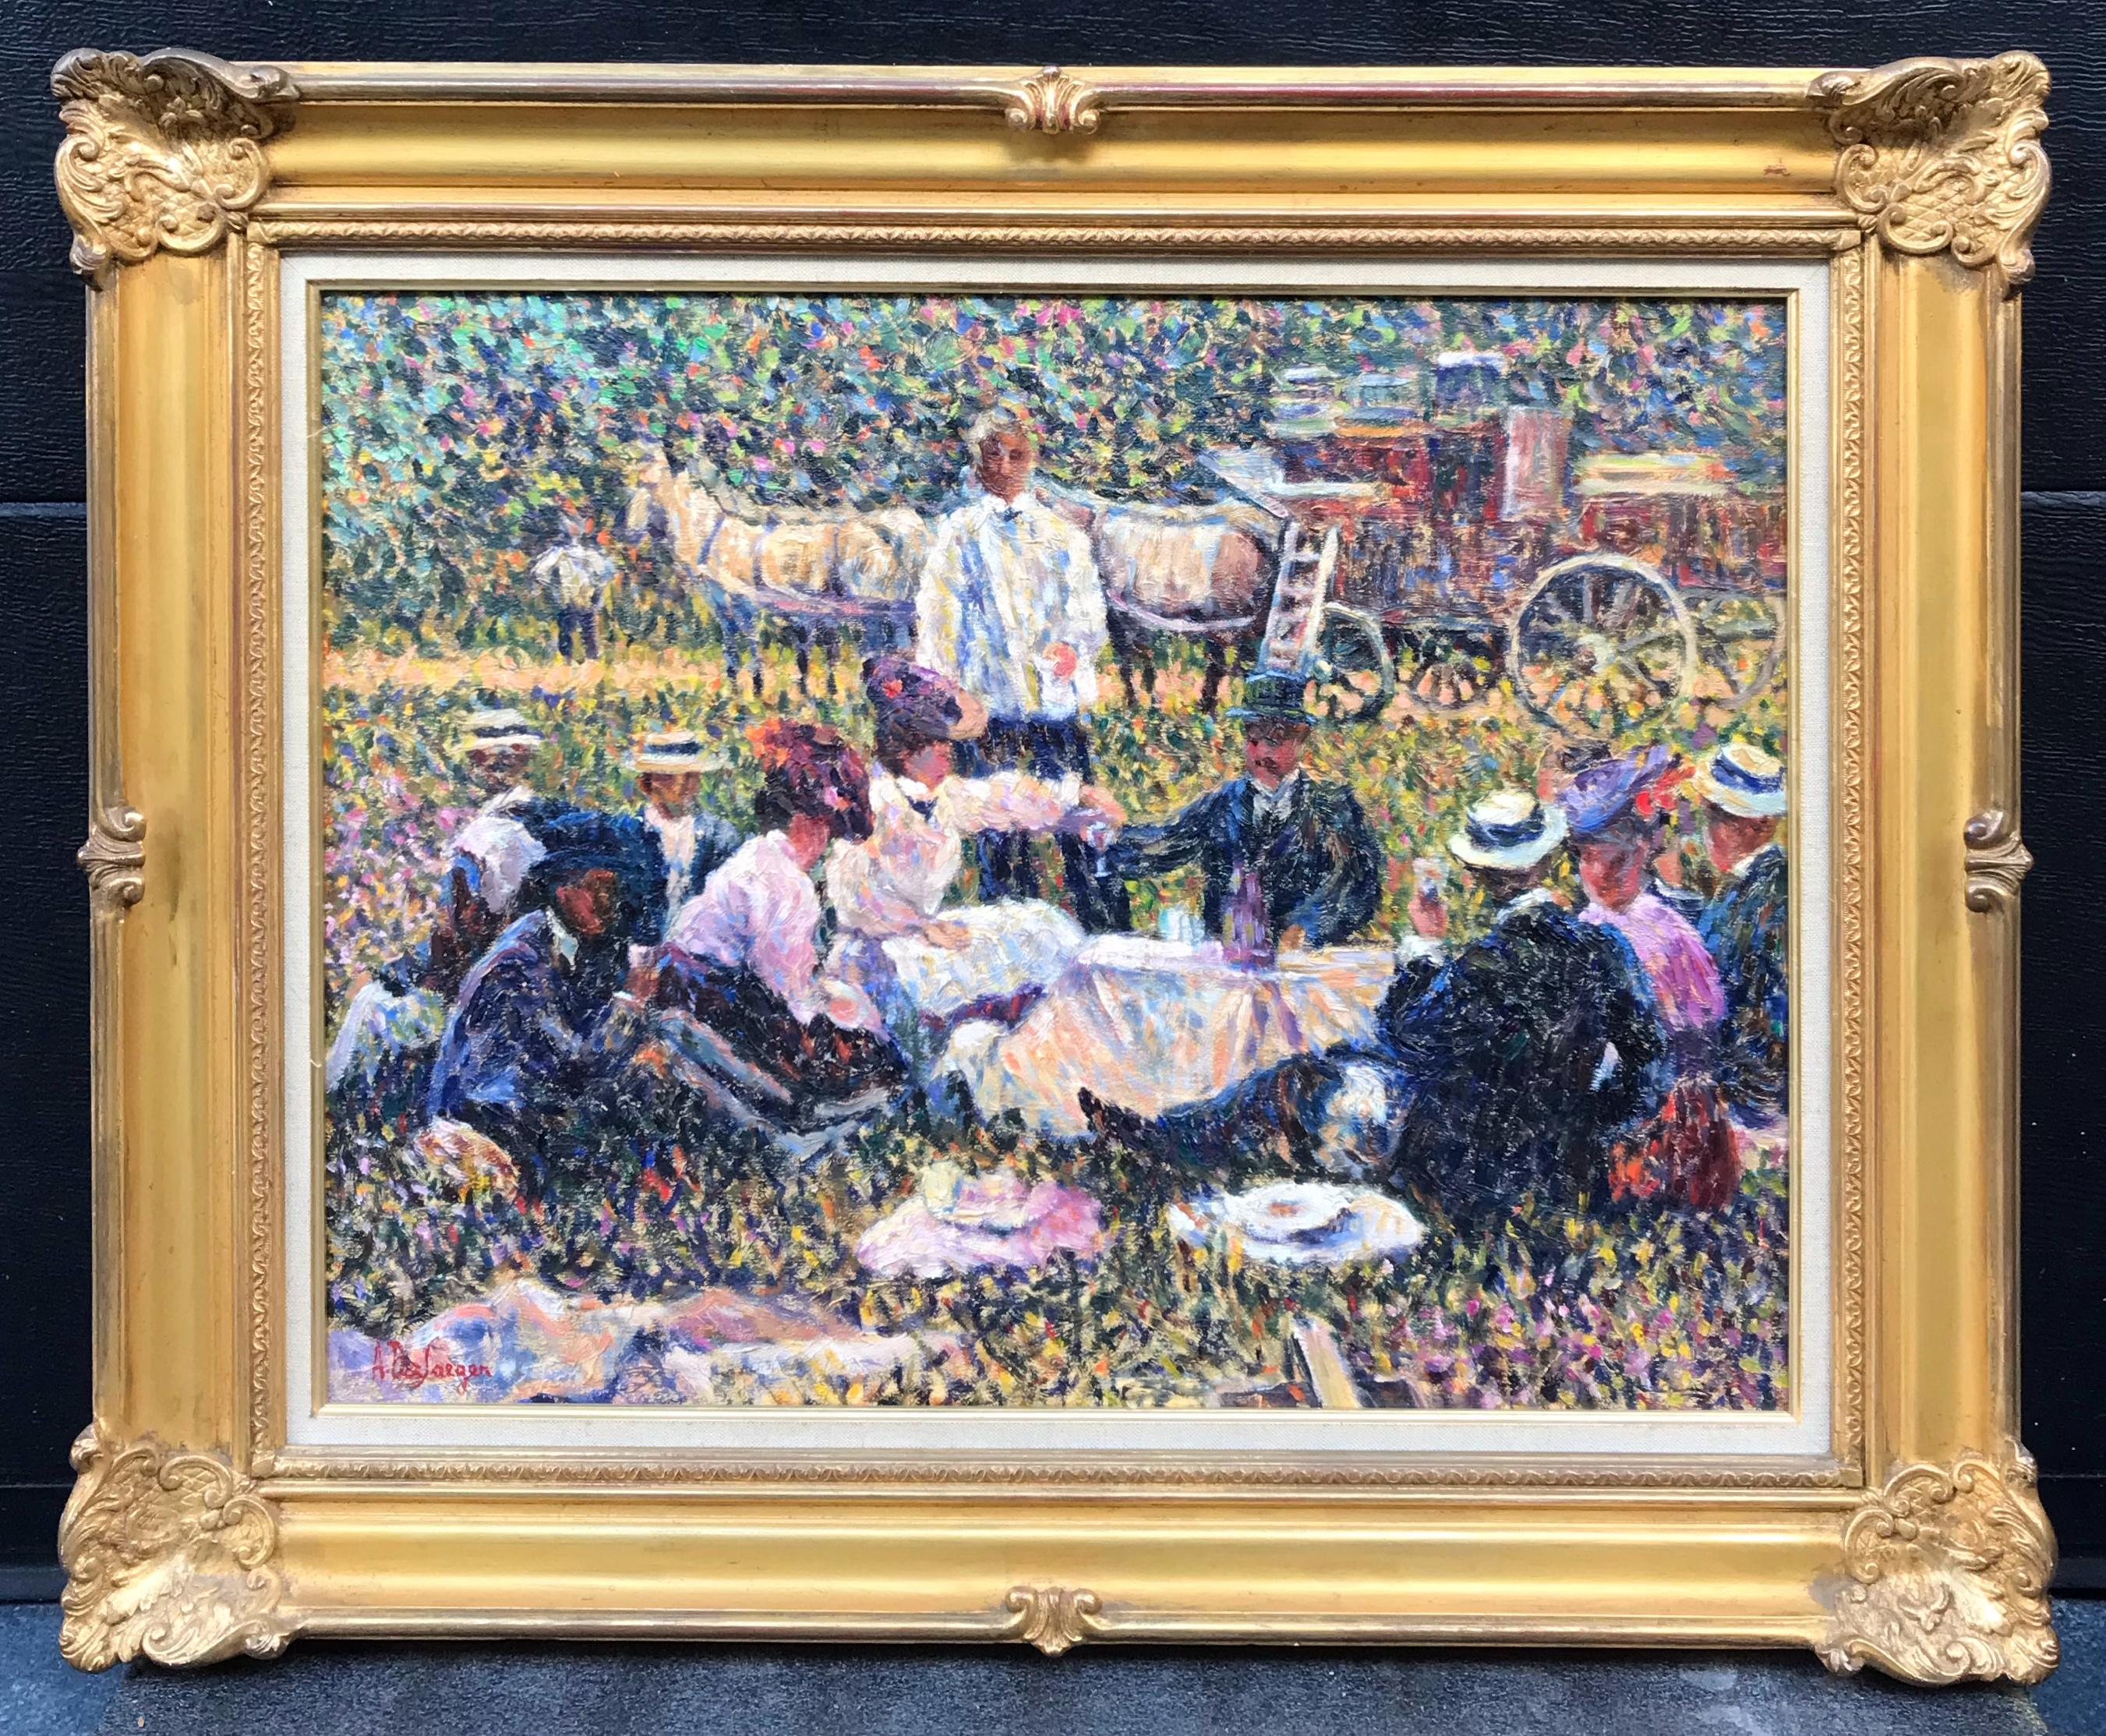 Anne de Saeger Portrait Painting - Lunch On The Grass - Post-Impressionist painting